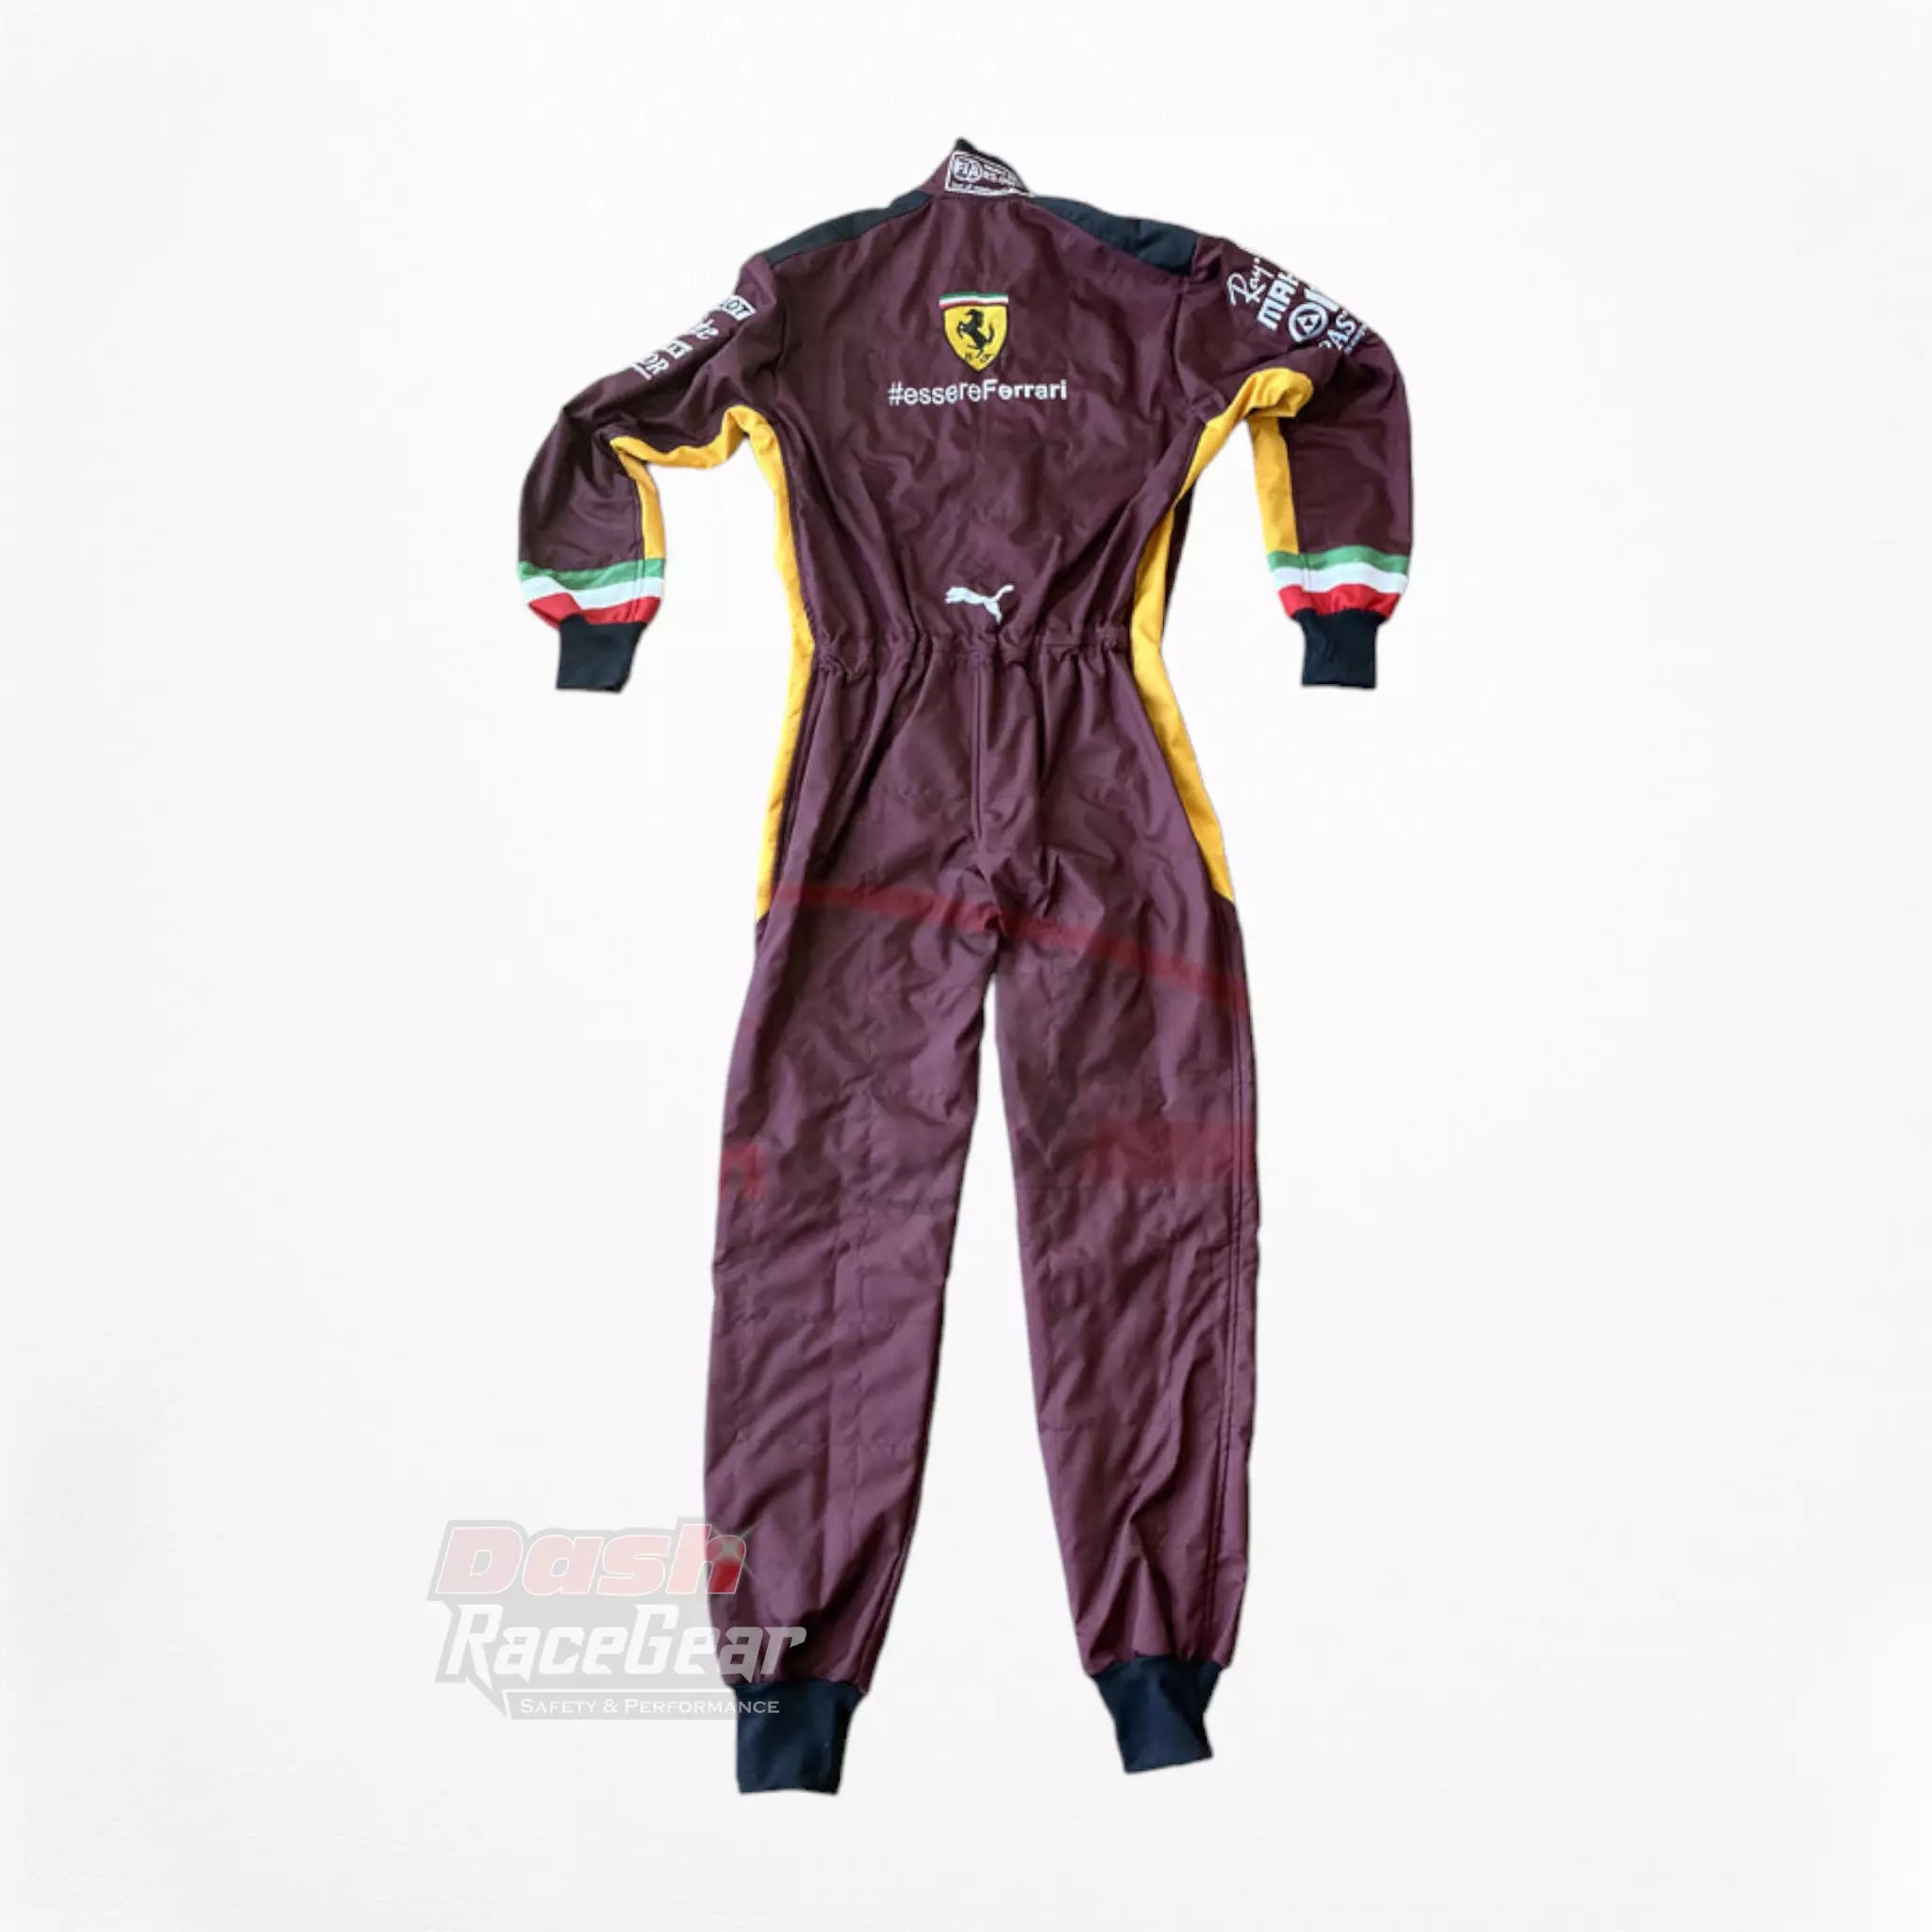 2020 Charles Leclerc Ferrari 1000 GP F1 Embroidered Racing Suit